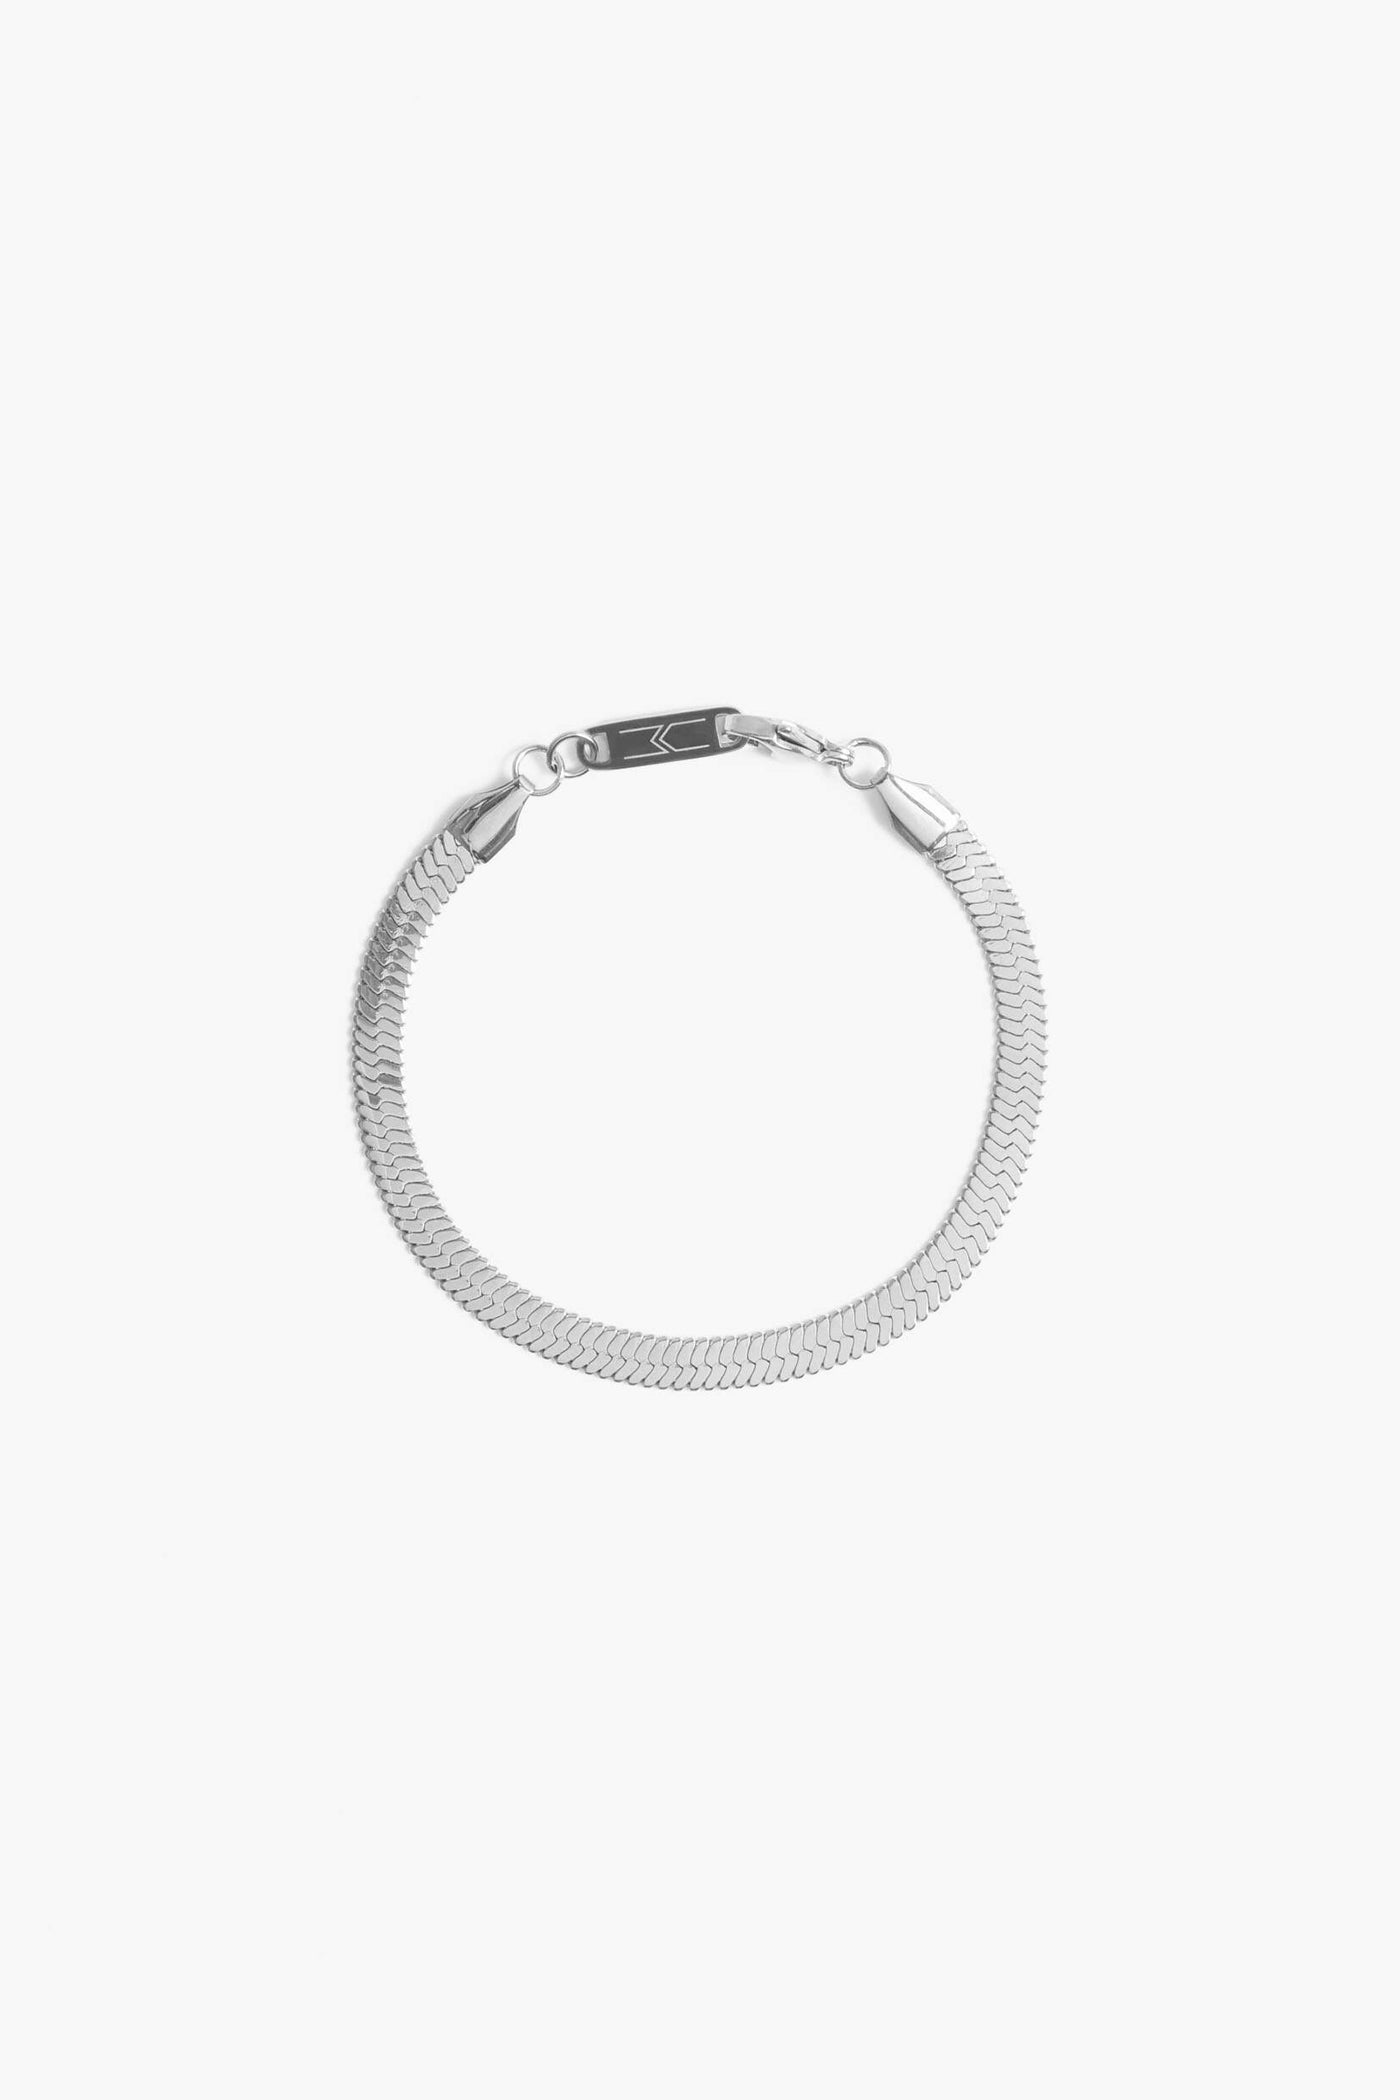 Marrin Costello Jewelry 5mm thick herringbone snake chain bracelet with lobster clasp closure. Waterproof, sustainable, hypoallergenic. Polished stainless steel.